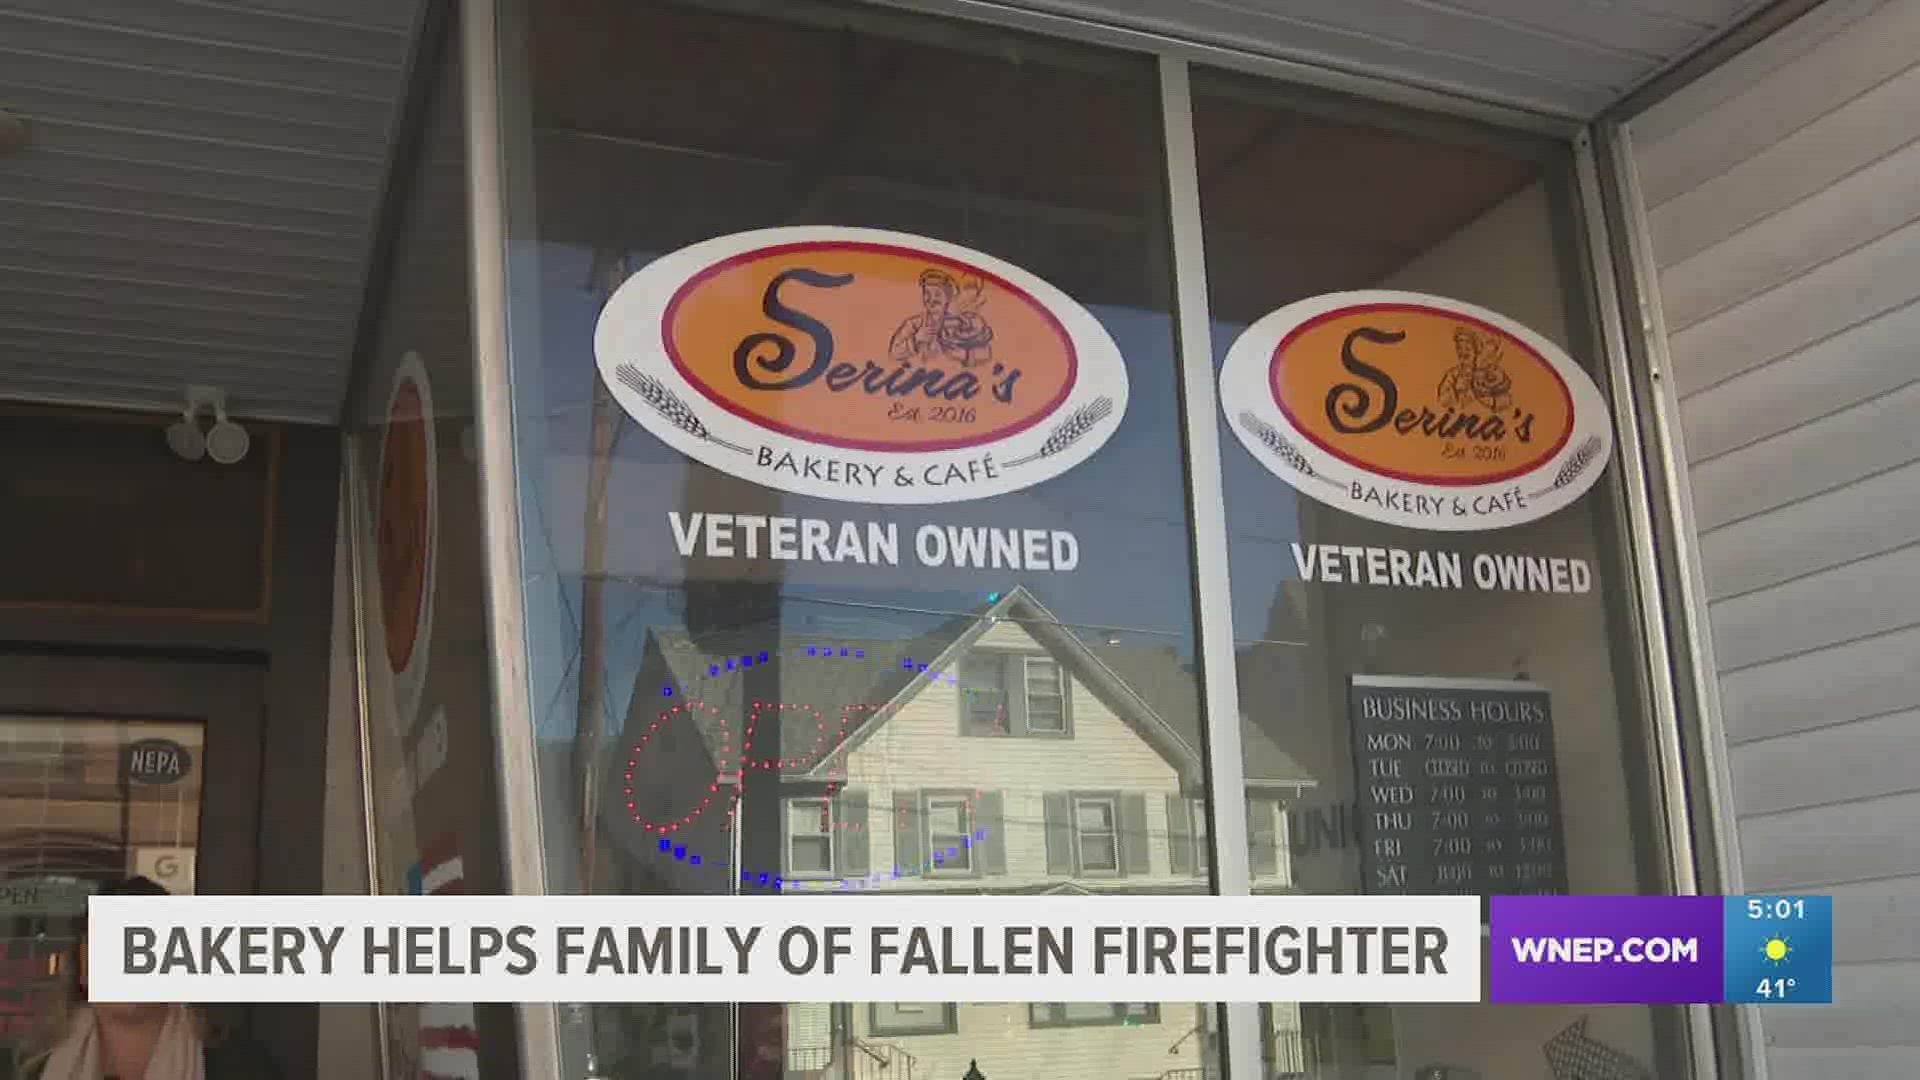 Serina's Bakery & Cafe is collecting Christmas gifts and donations for the family of New Tripoli Fire Company Assistant Chief Zachary Paris.